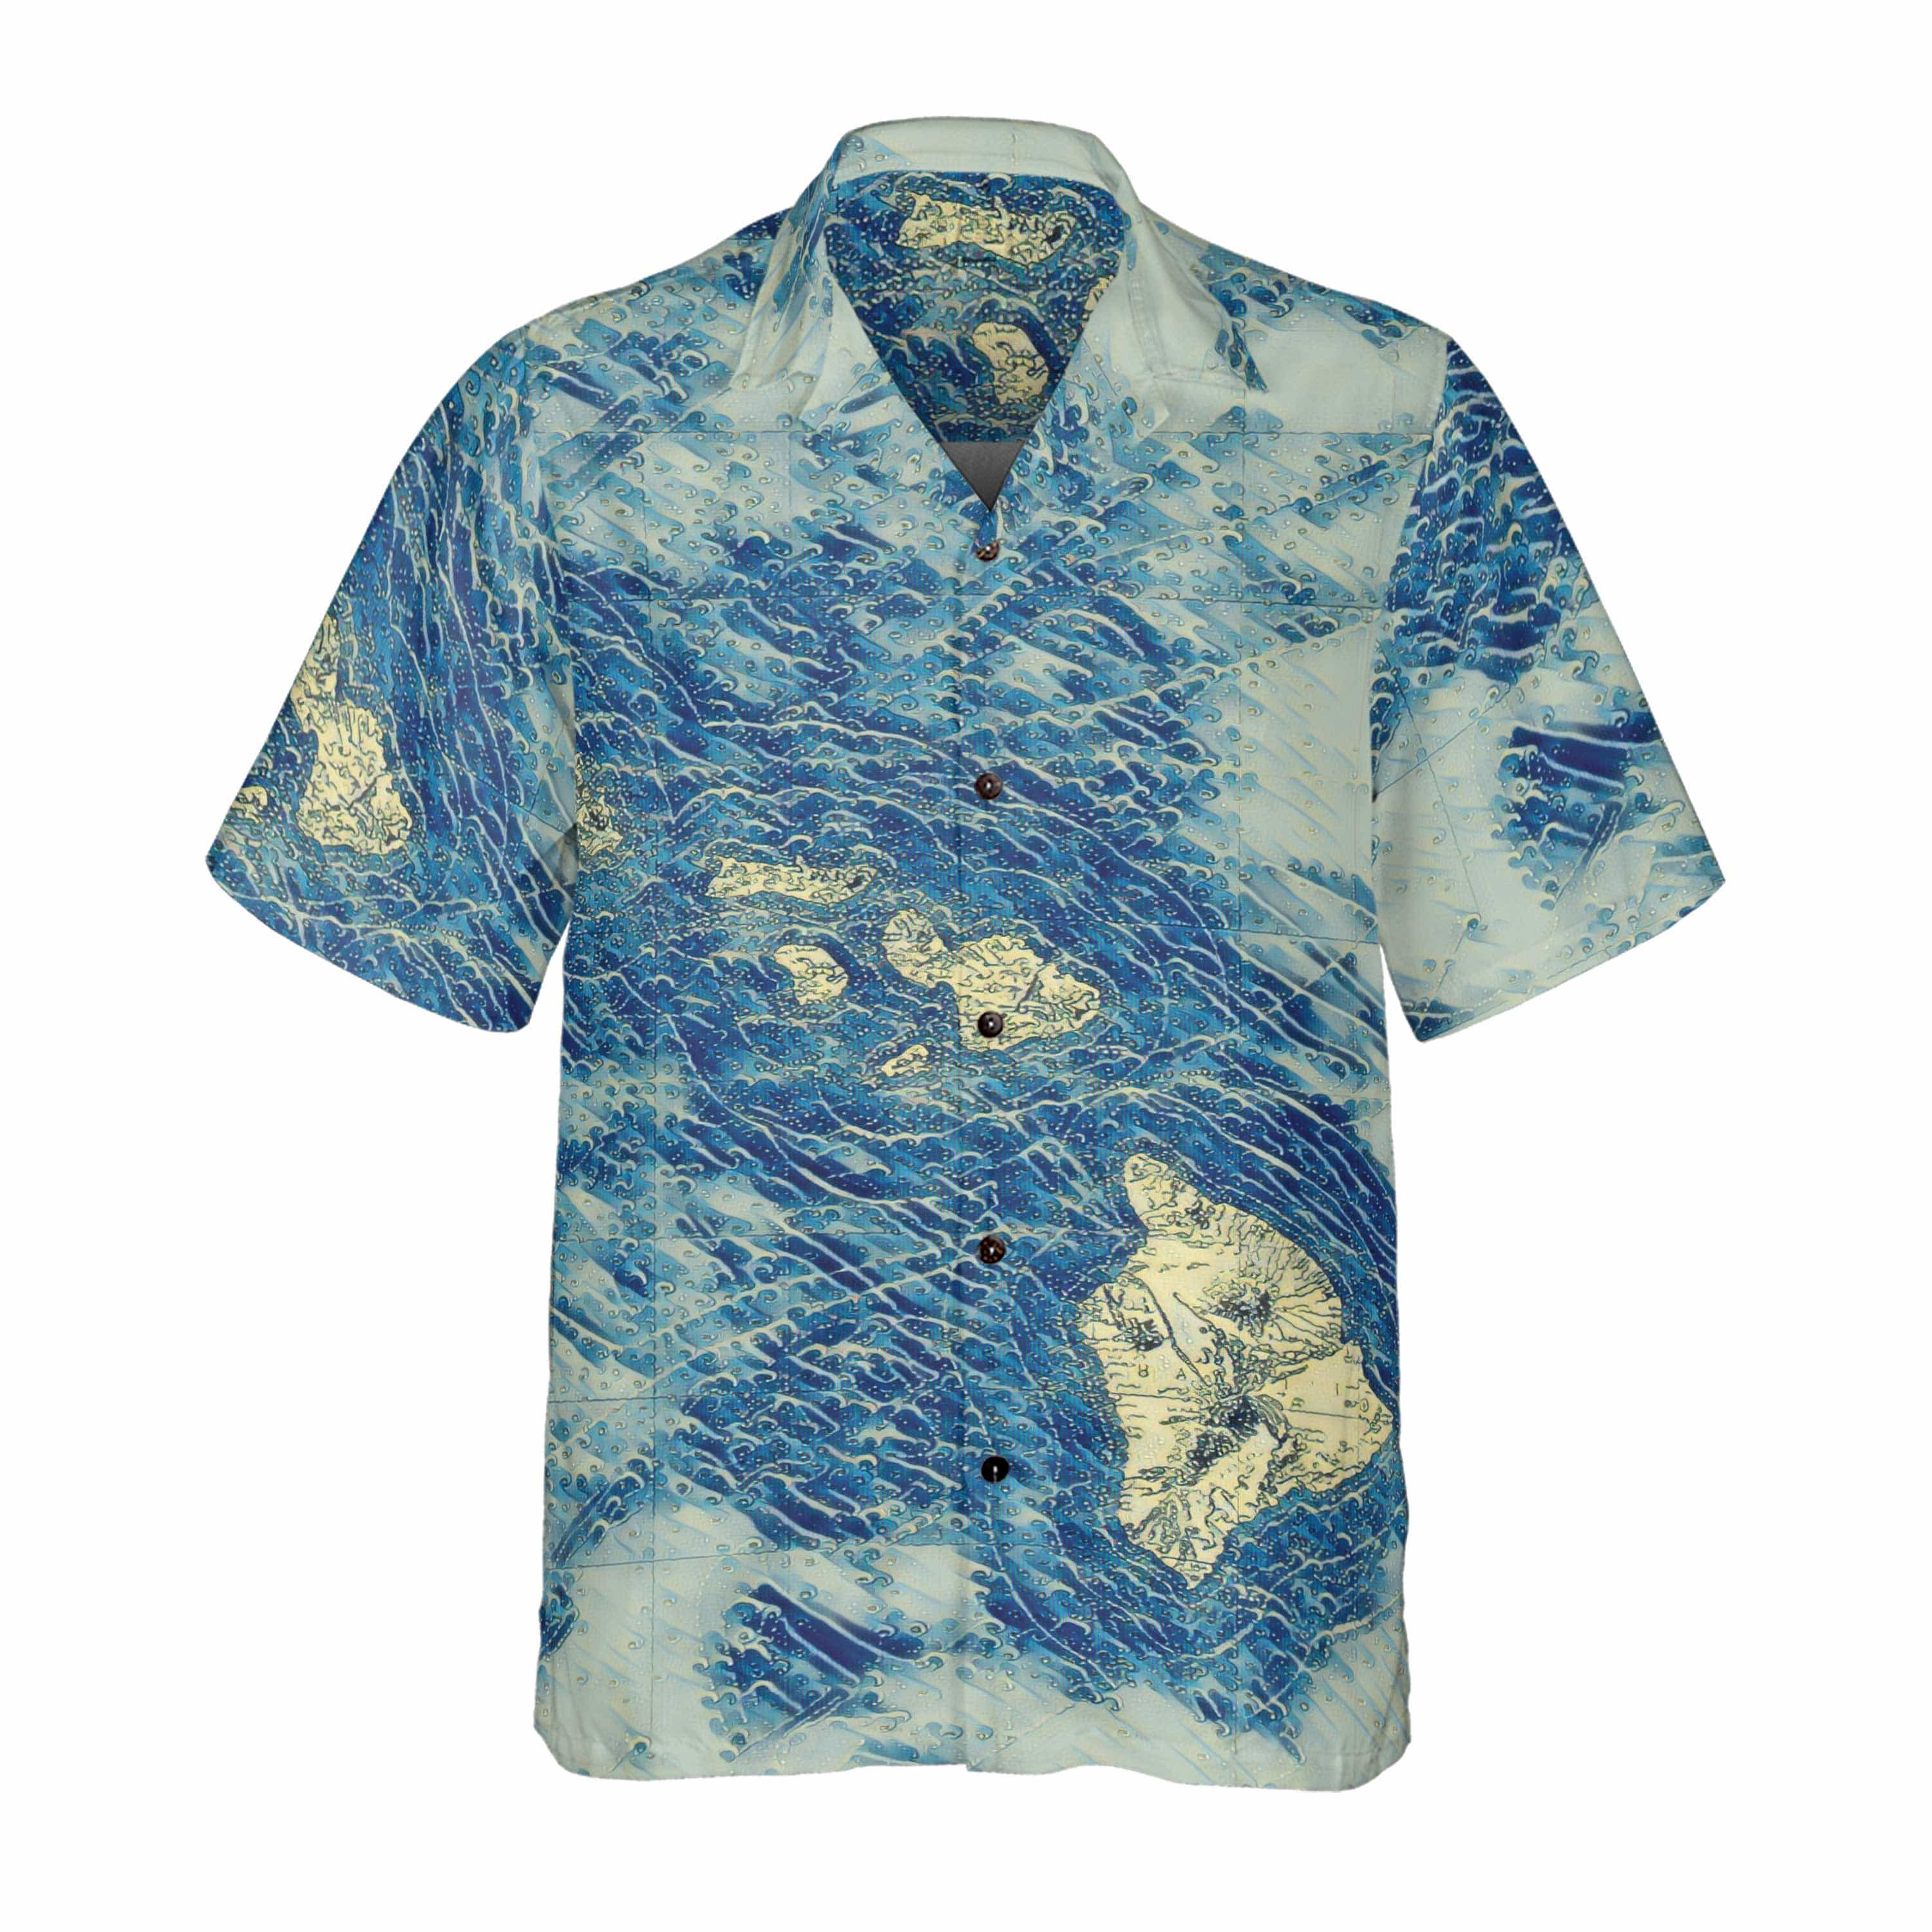 The Hawaii Watercolor Waves Coconut Button Camp Shirt